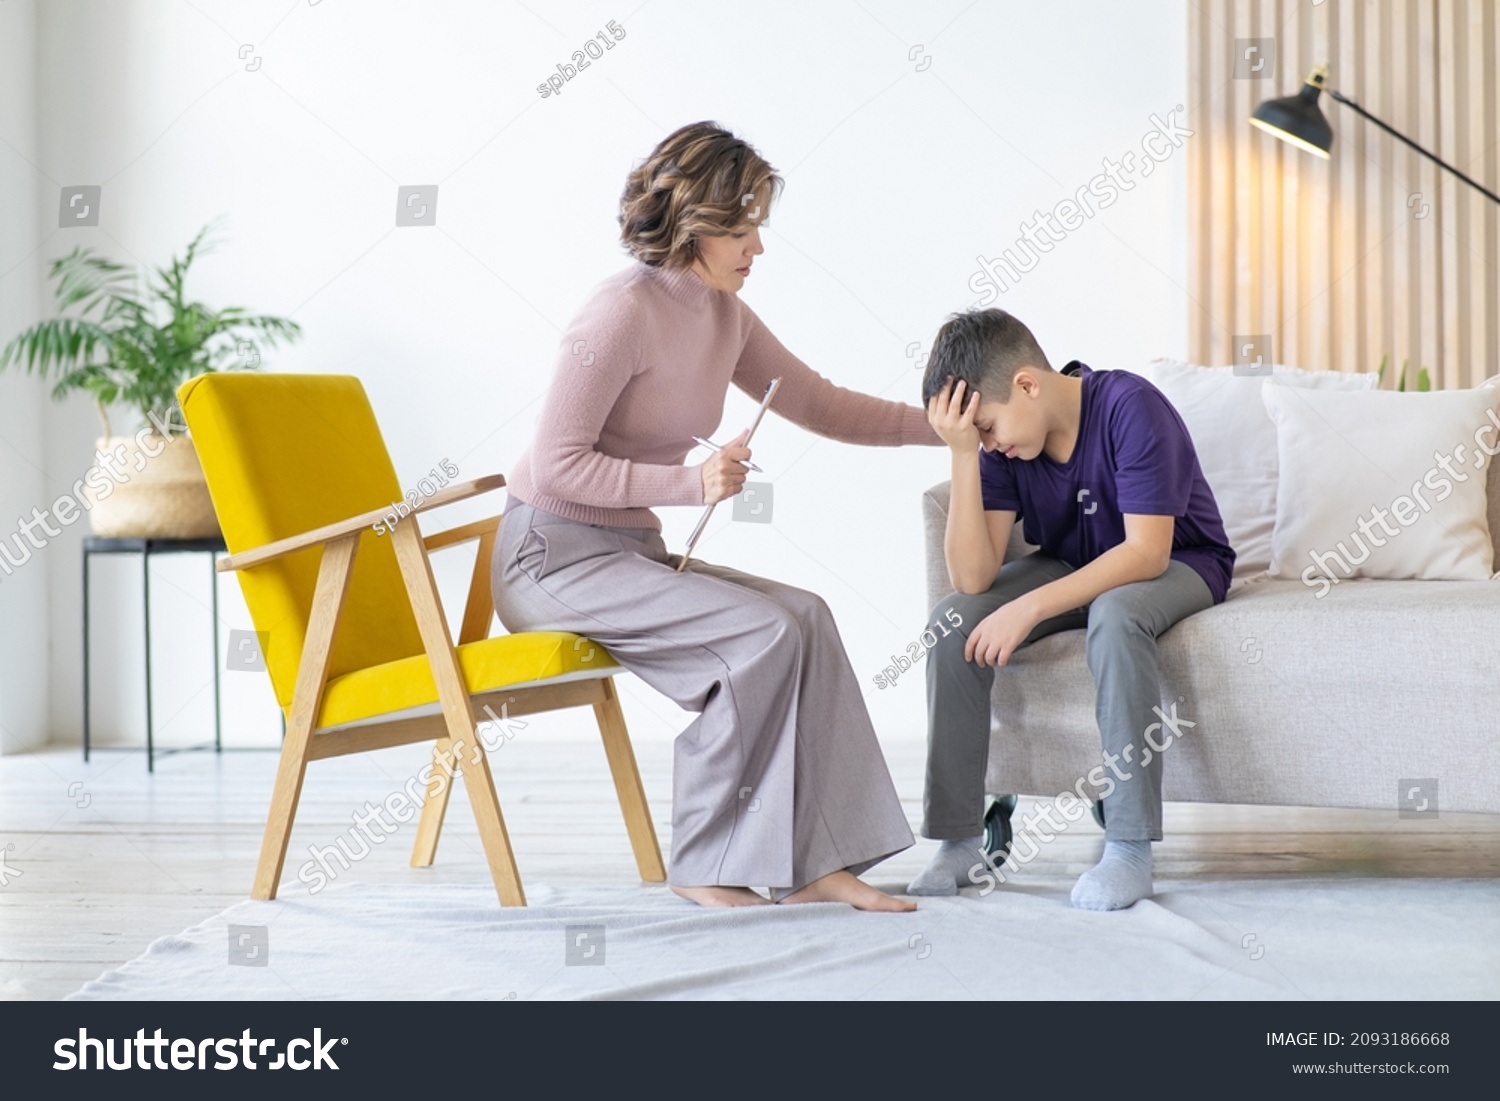 Counseling adolescent psychologist calms and holds adolescent by shoulder. Boy in purple t-shirt is worried and holds his head with his hand, while sitting on couch in minimalistic room. #2093186668